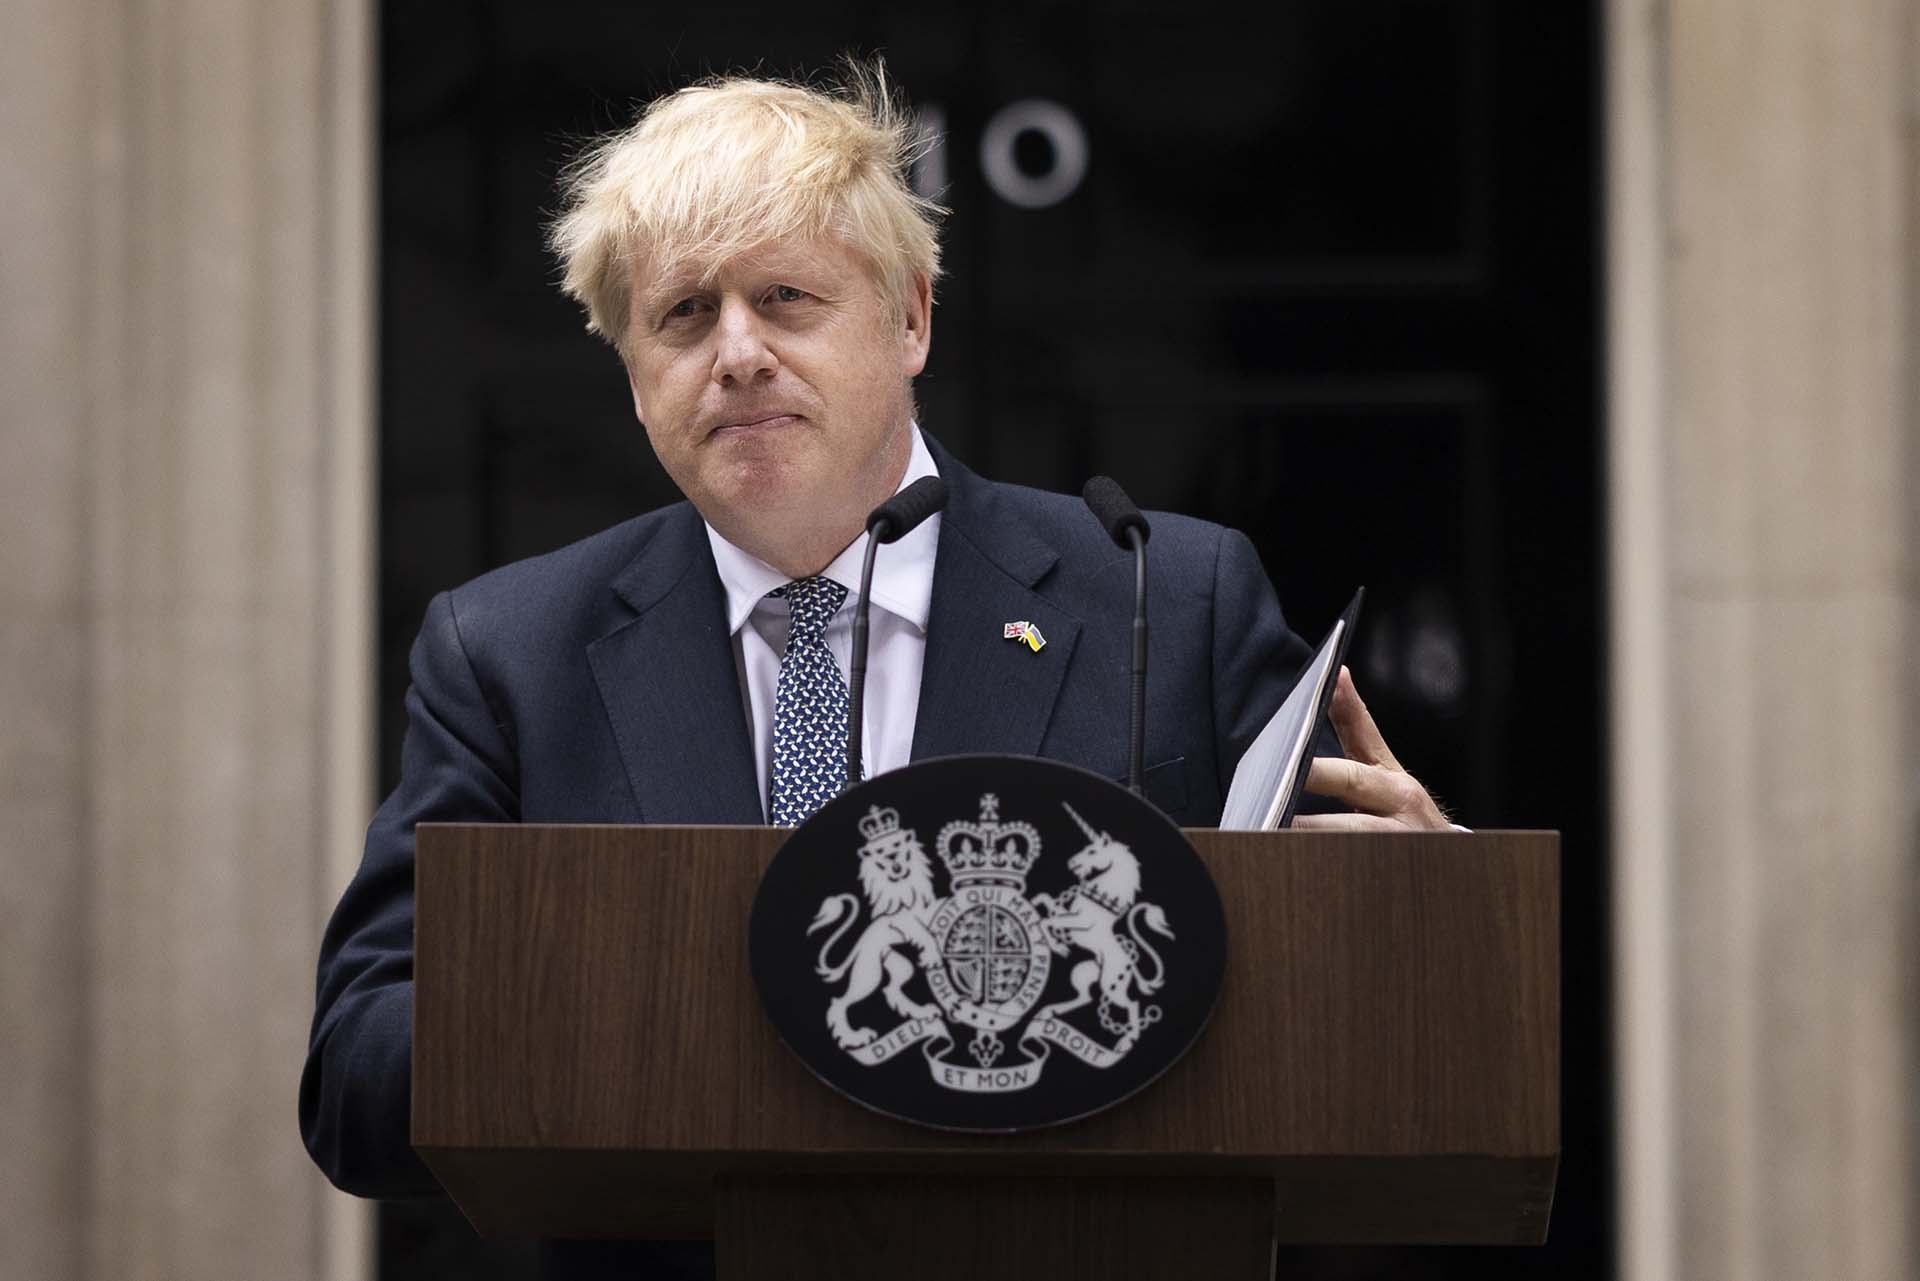 Parties in Downing Street led to Boris Johnson leaving the government (Getty Images)